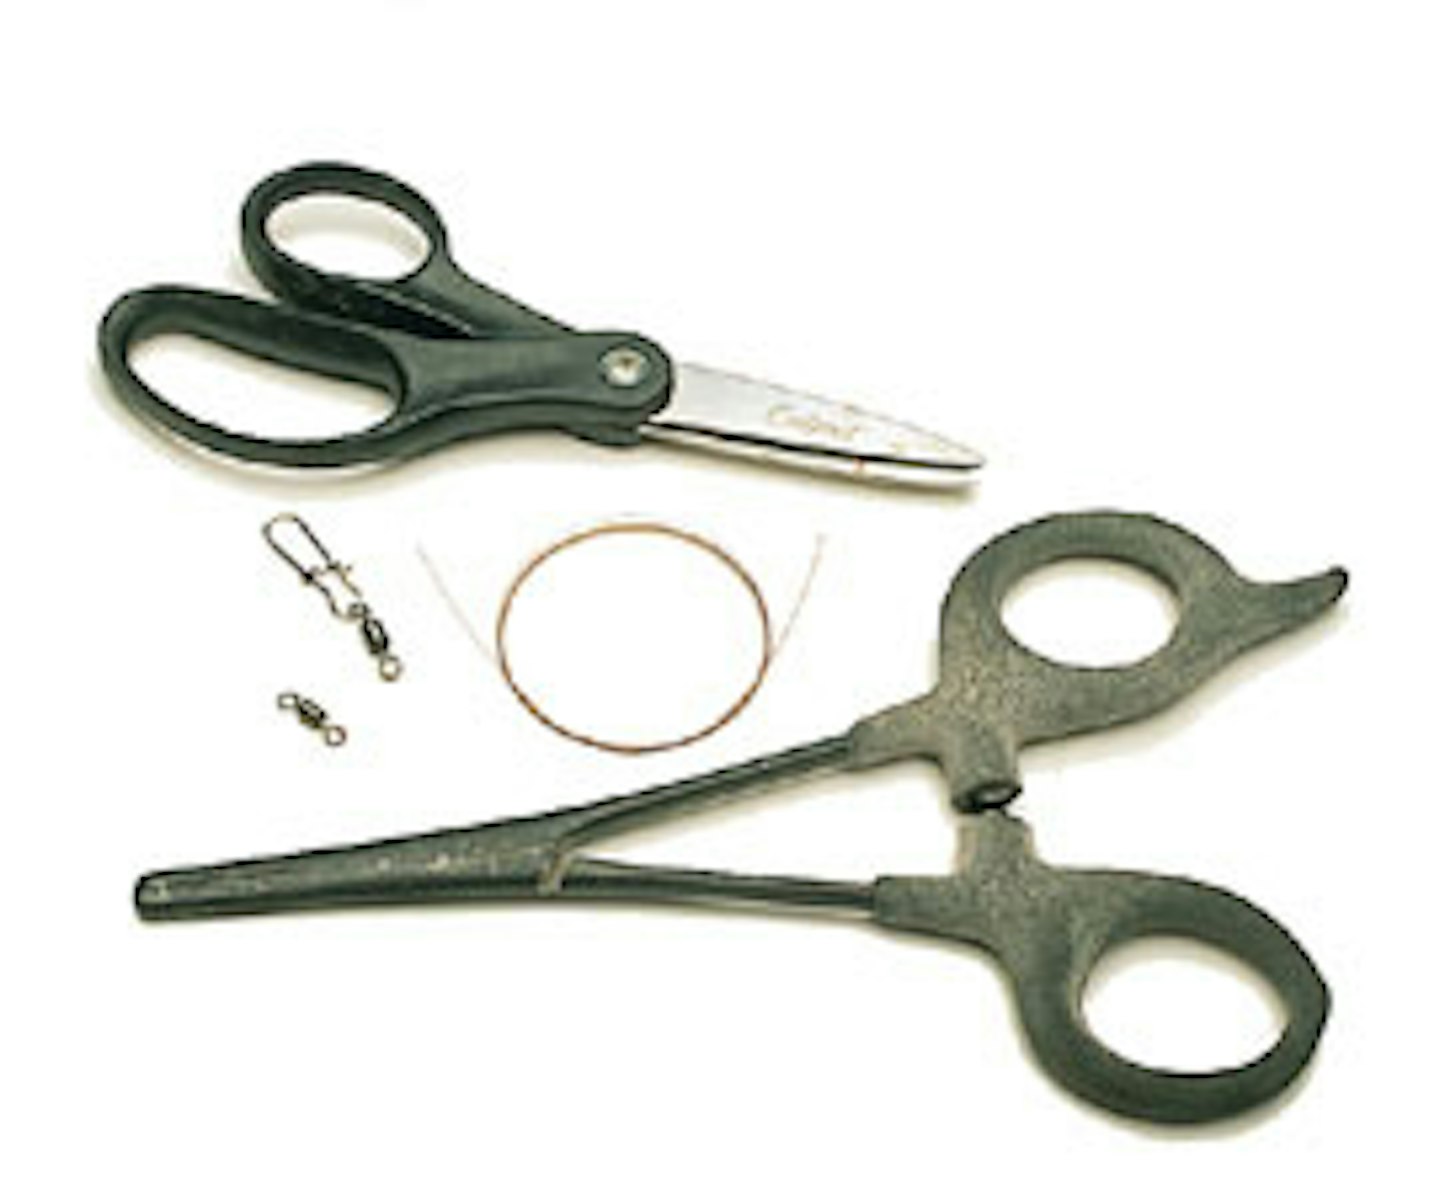 1. You will need 18 inches of wire, a swivel, a snap link swivel, wire cutters and a pair of forceps.